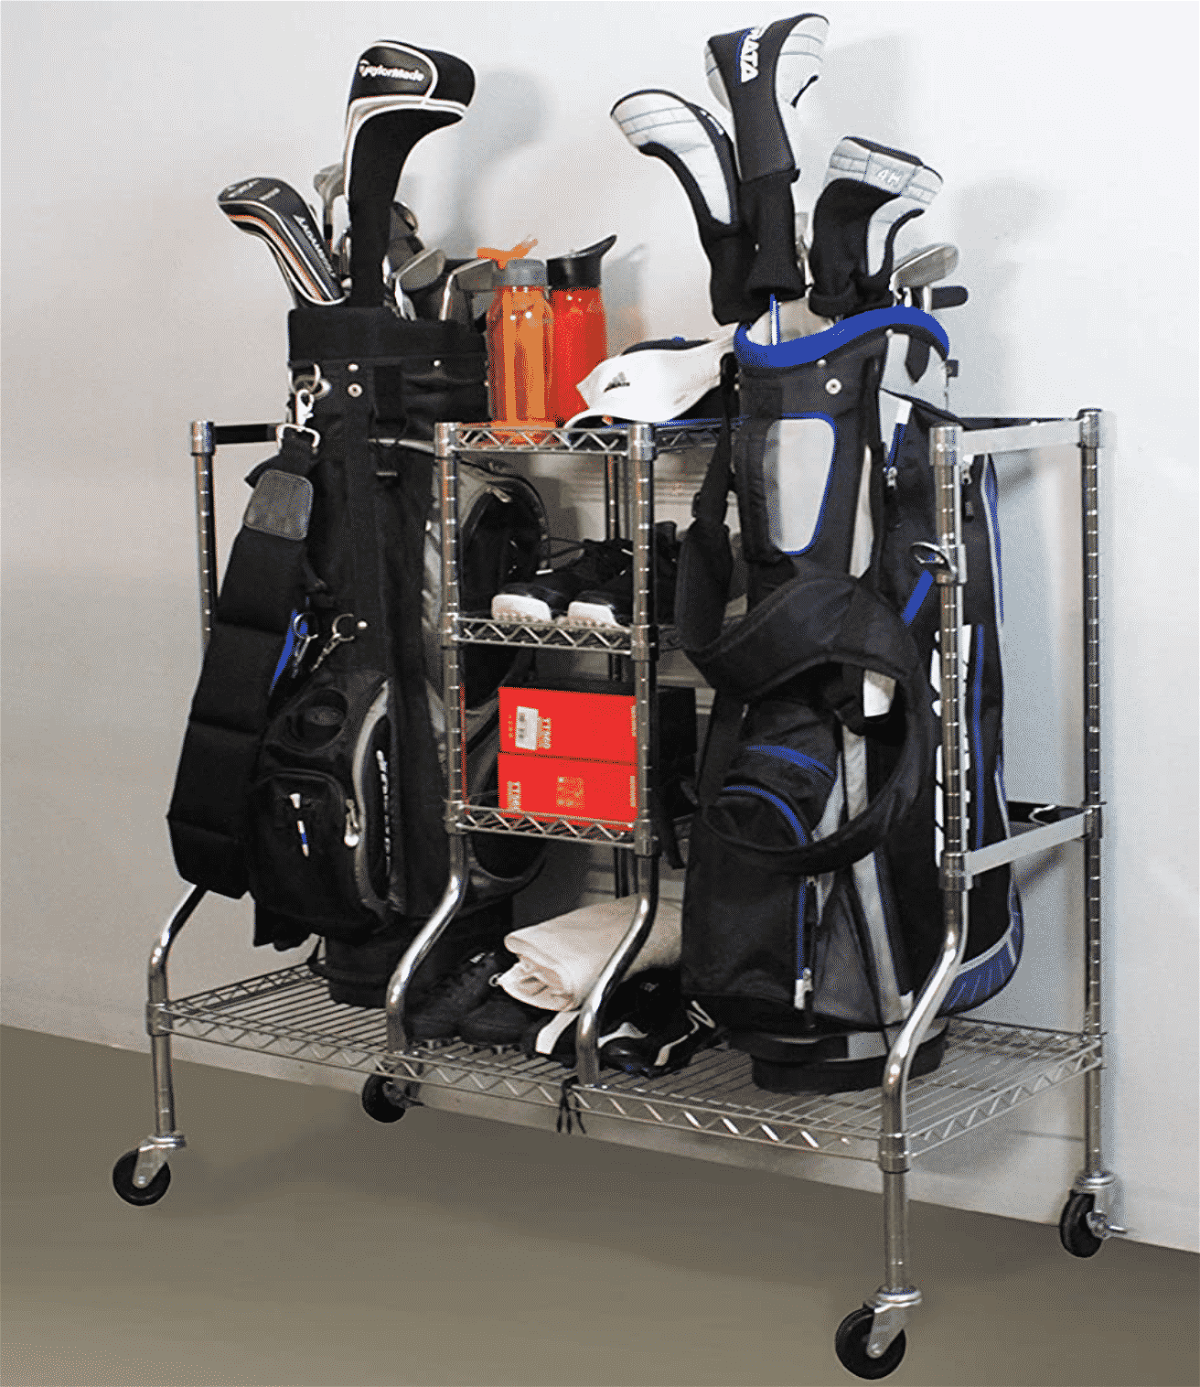 How to Hang Golf Bags in a Garage – A Golf Bag Storage Guide